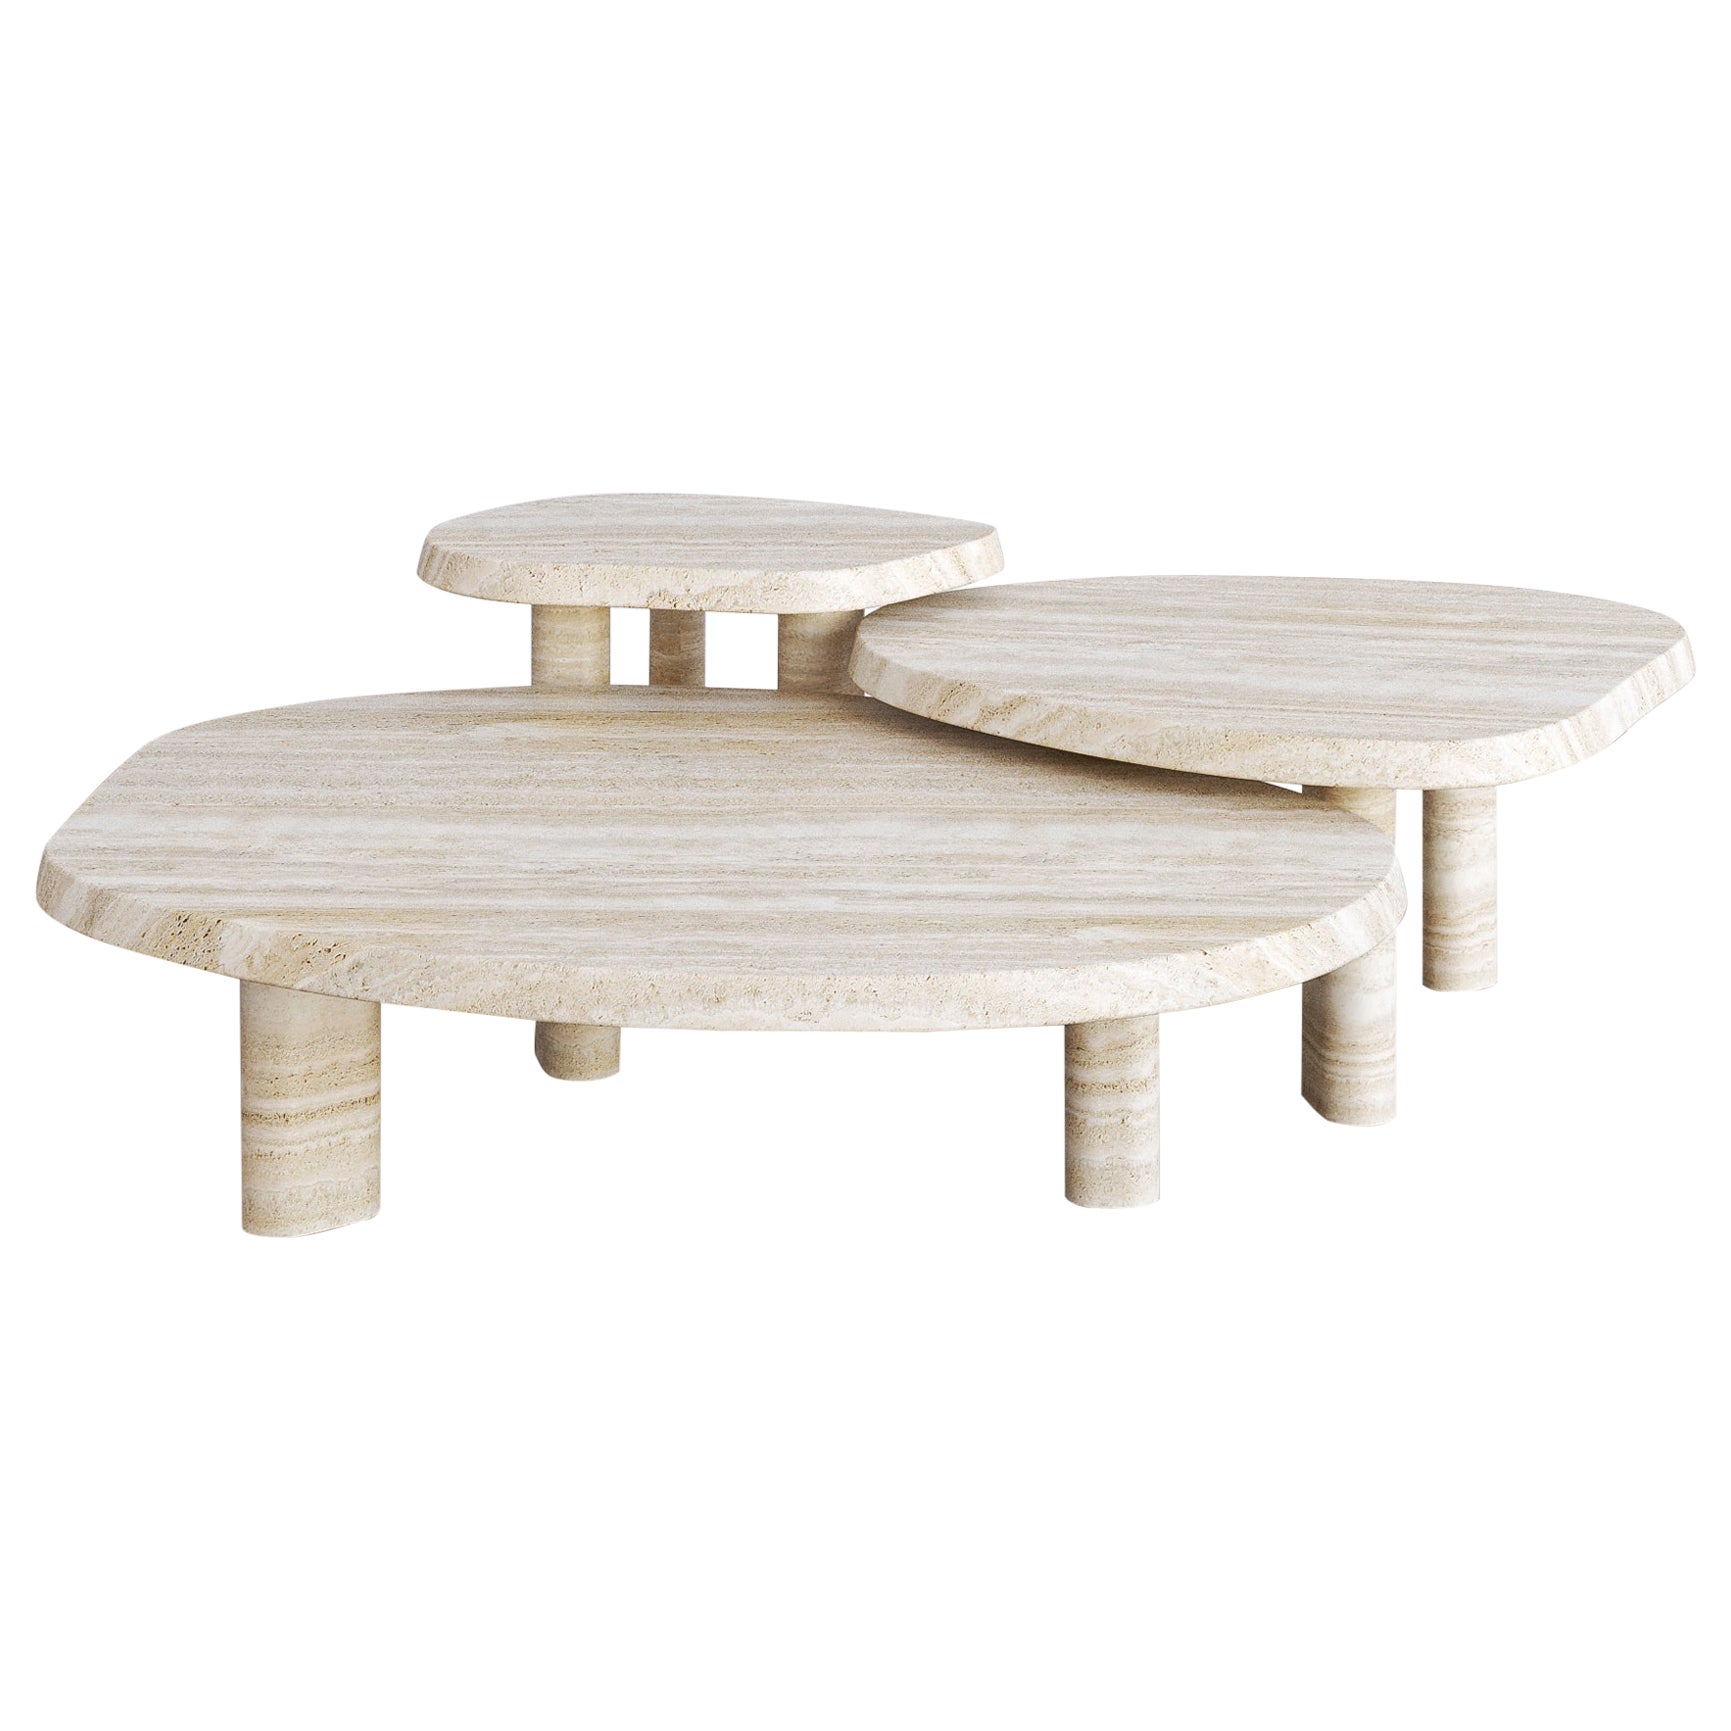 Nude Travertine Large Fiori Nesting Coffee Table by the Essentialist For Sale